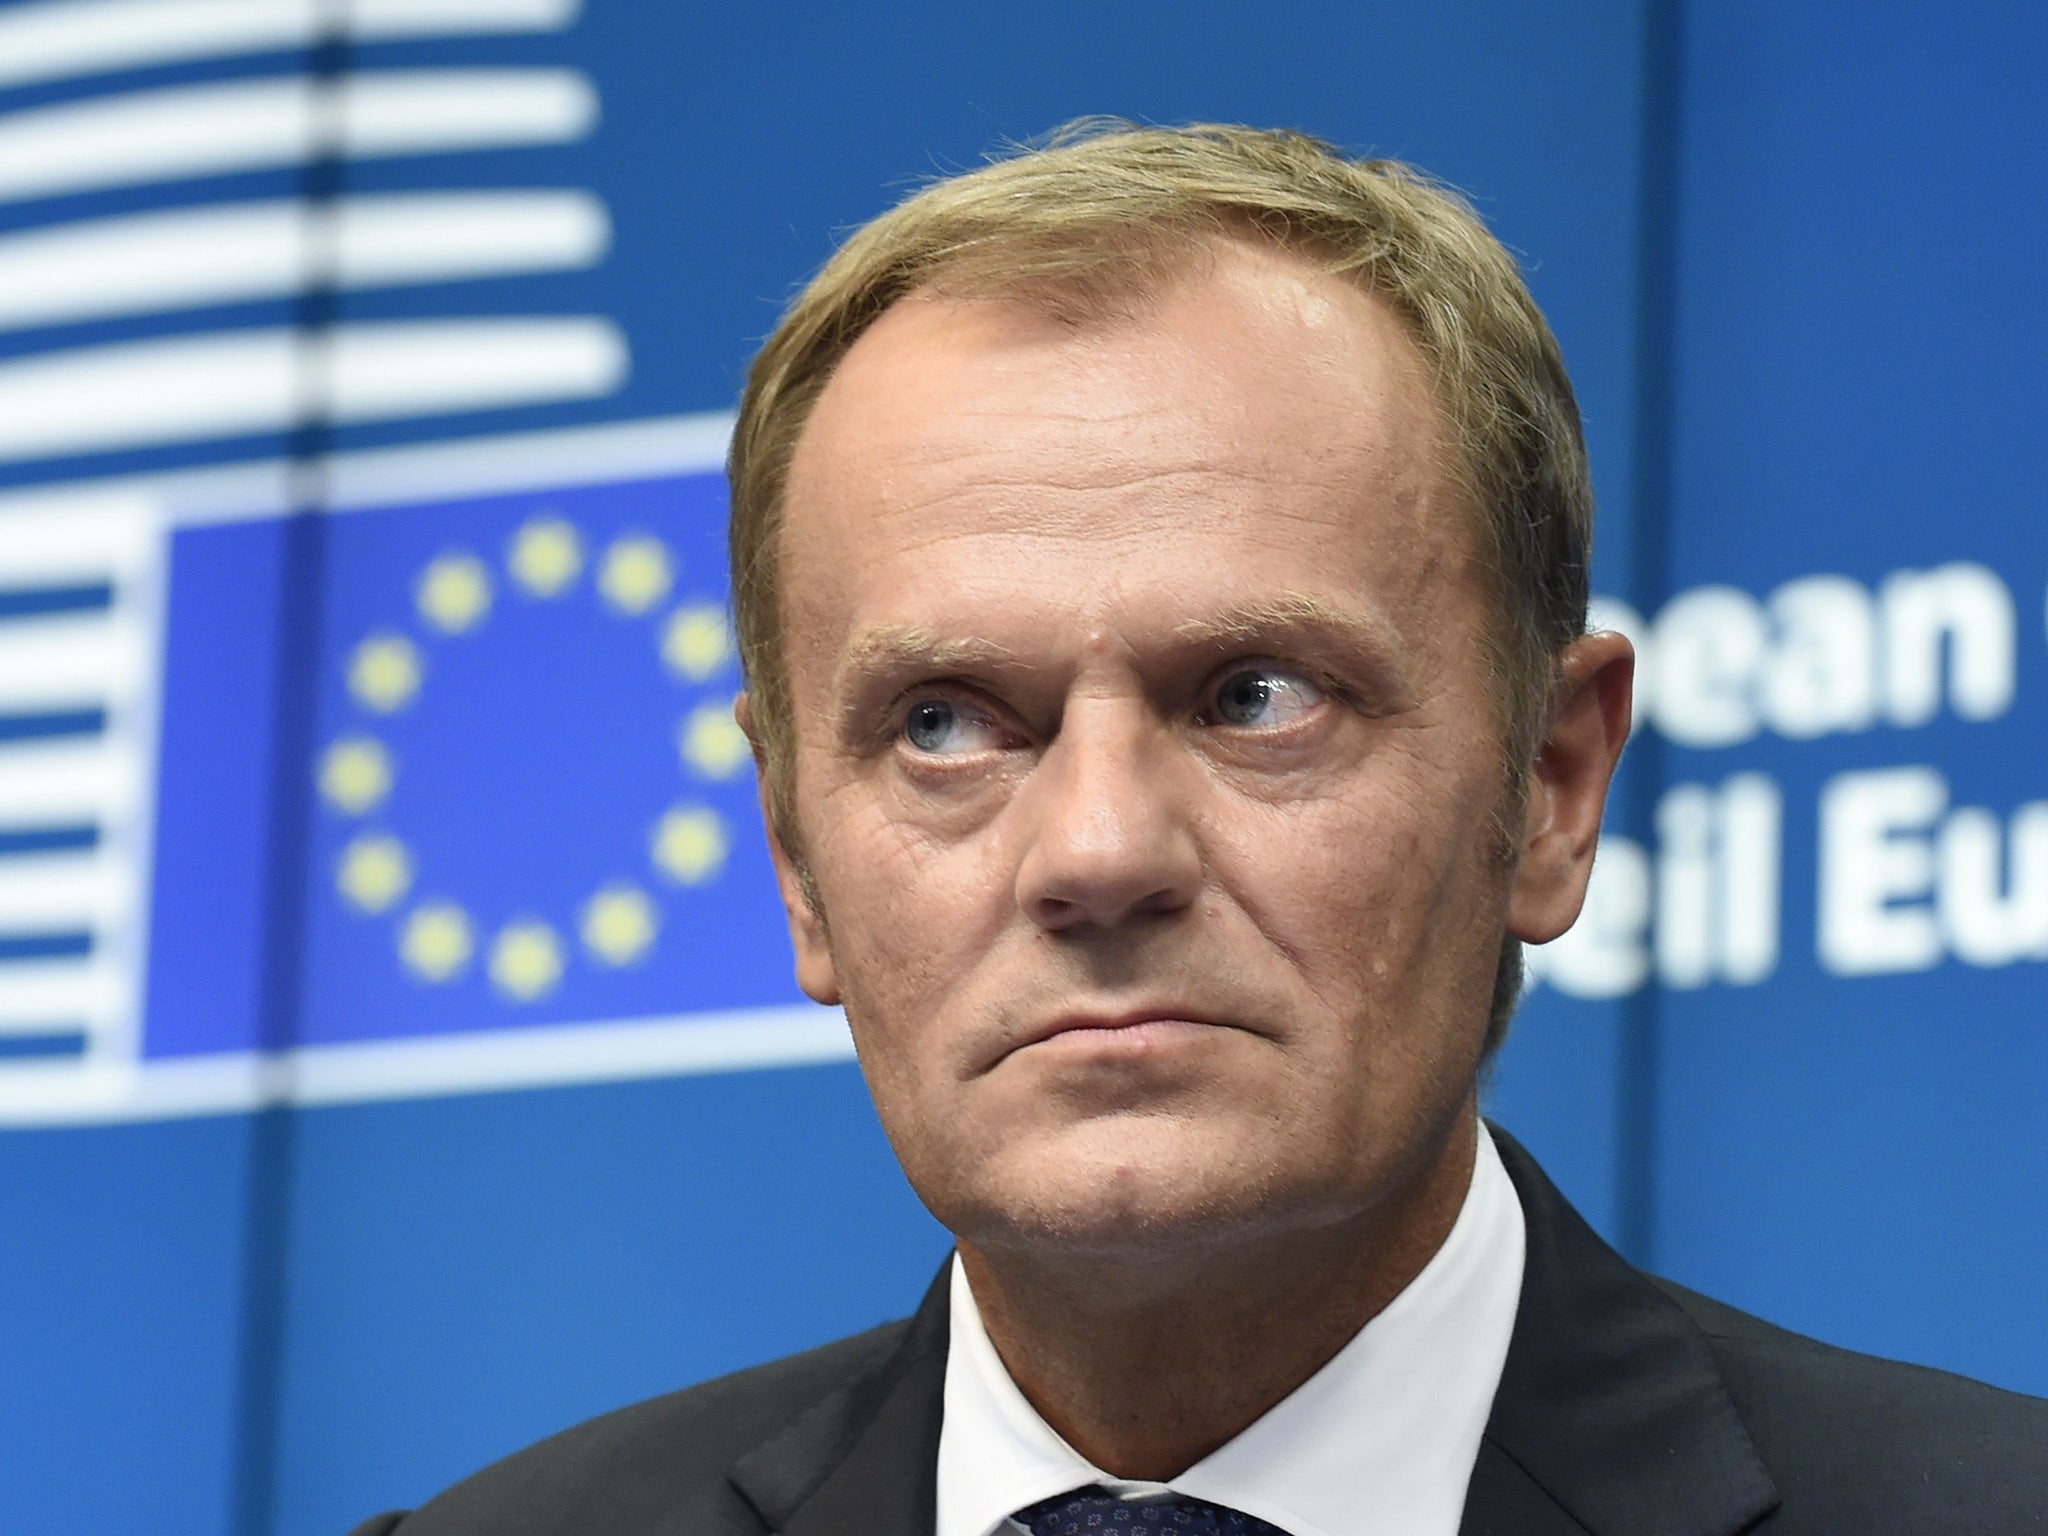 President of the European Council Donald Tusk: 'There’s no more time for gambling. The day is coming, I’m afraid, where someone says the game is over'